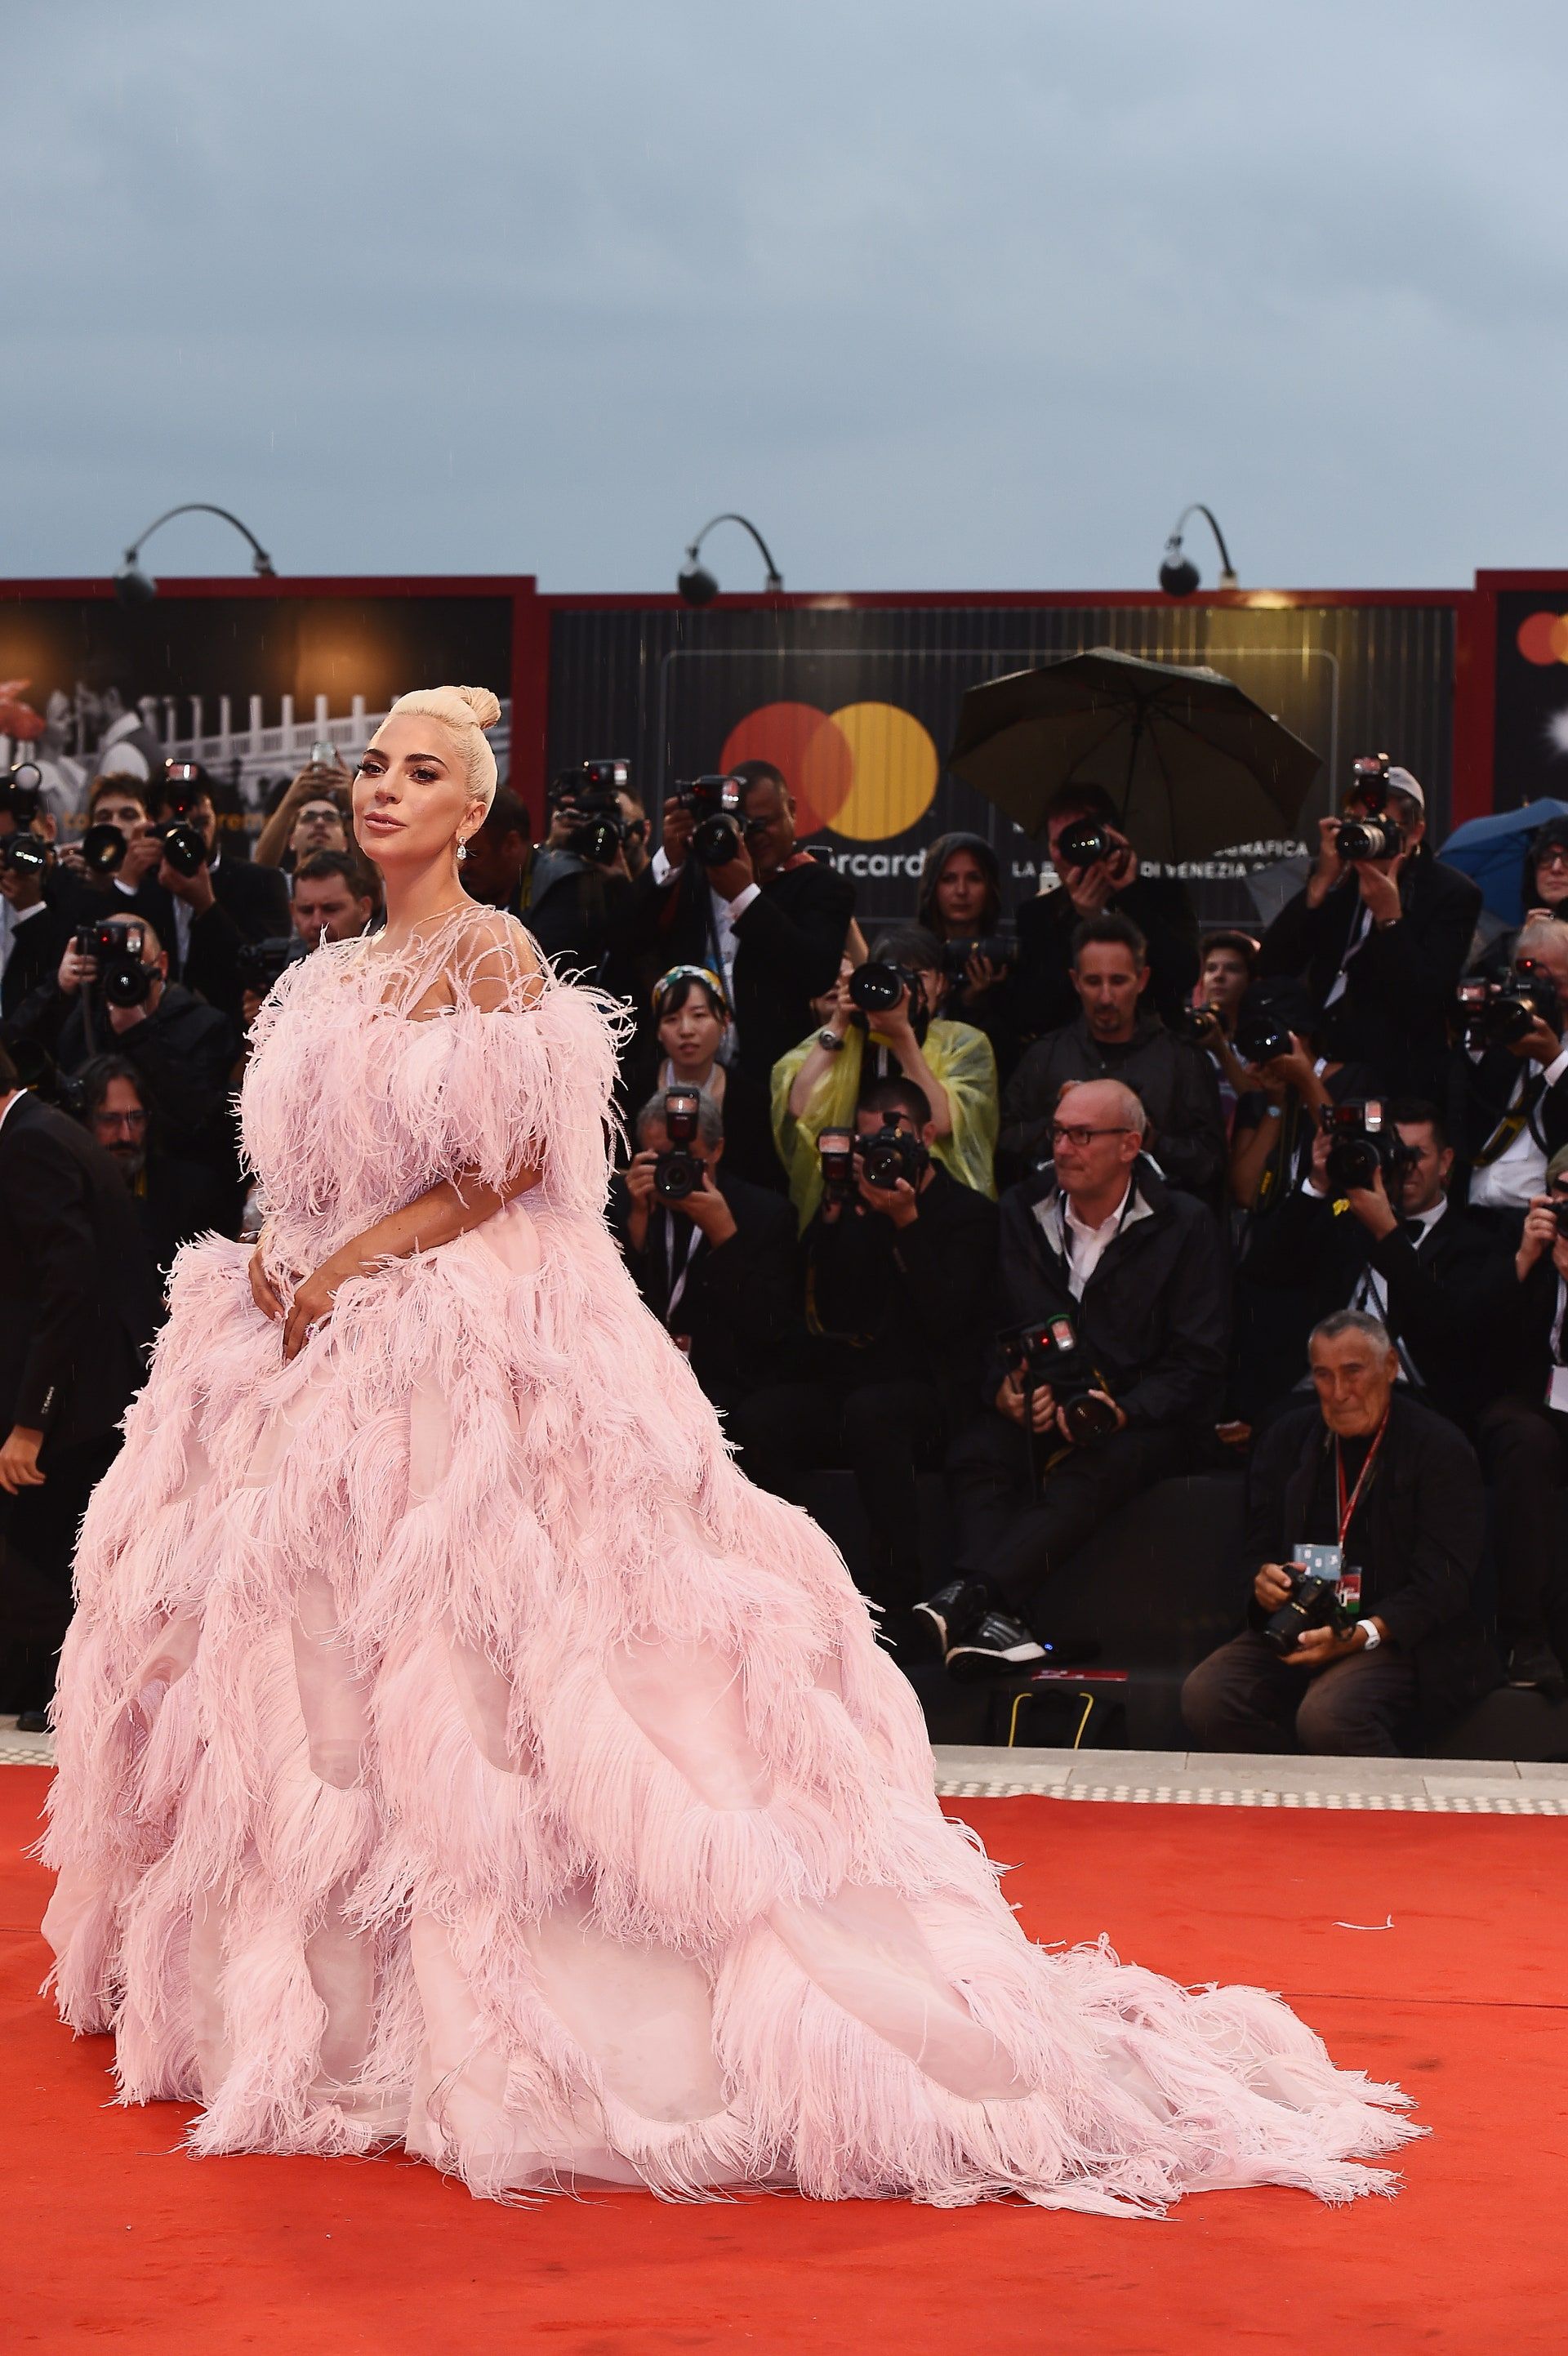 The Best Female Singers at the Venice Film Festival from time to time